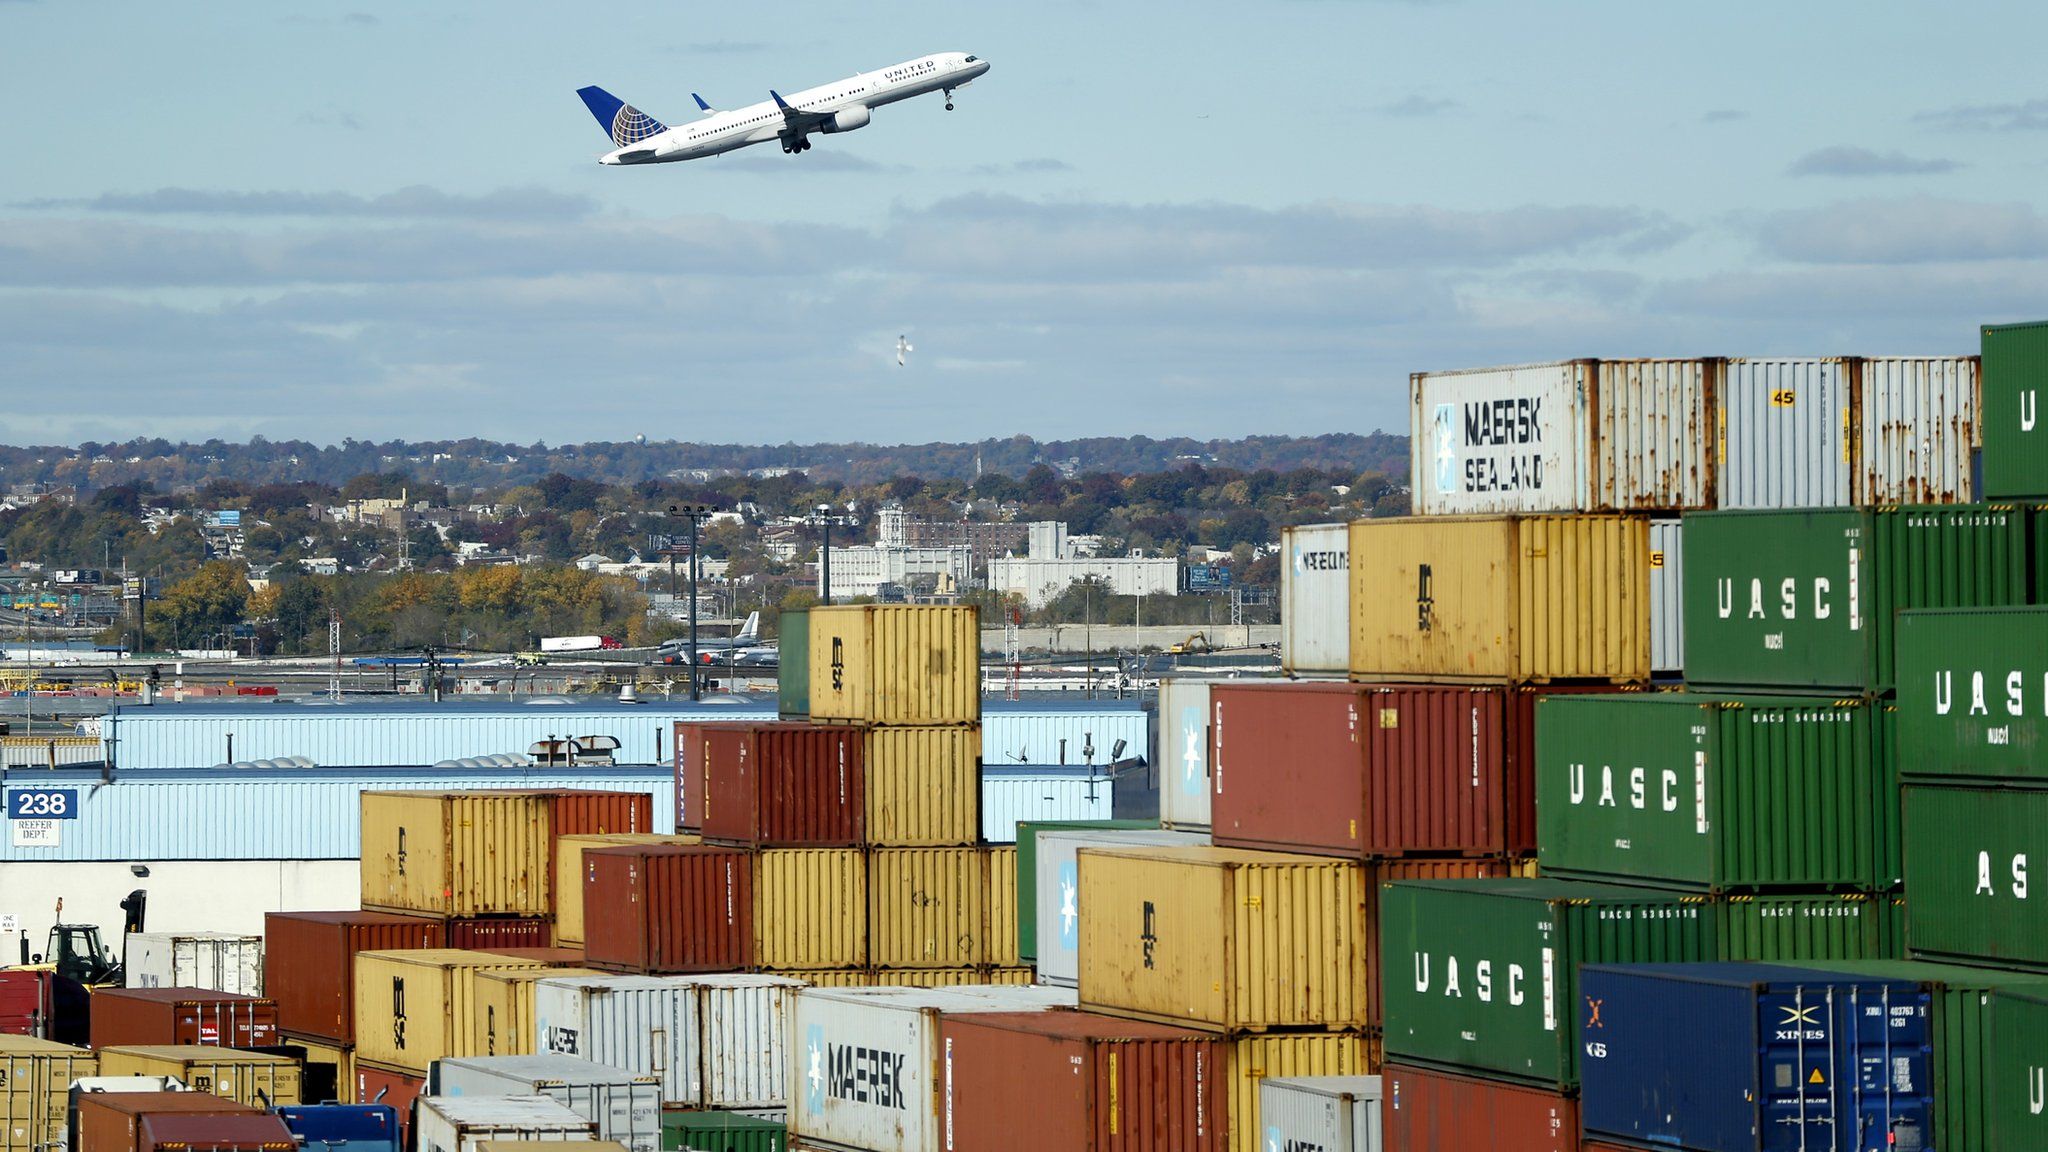 Plane flying over stack of containers